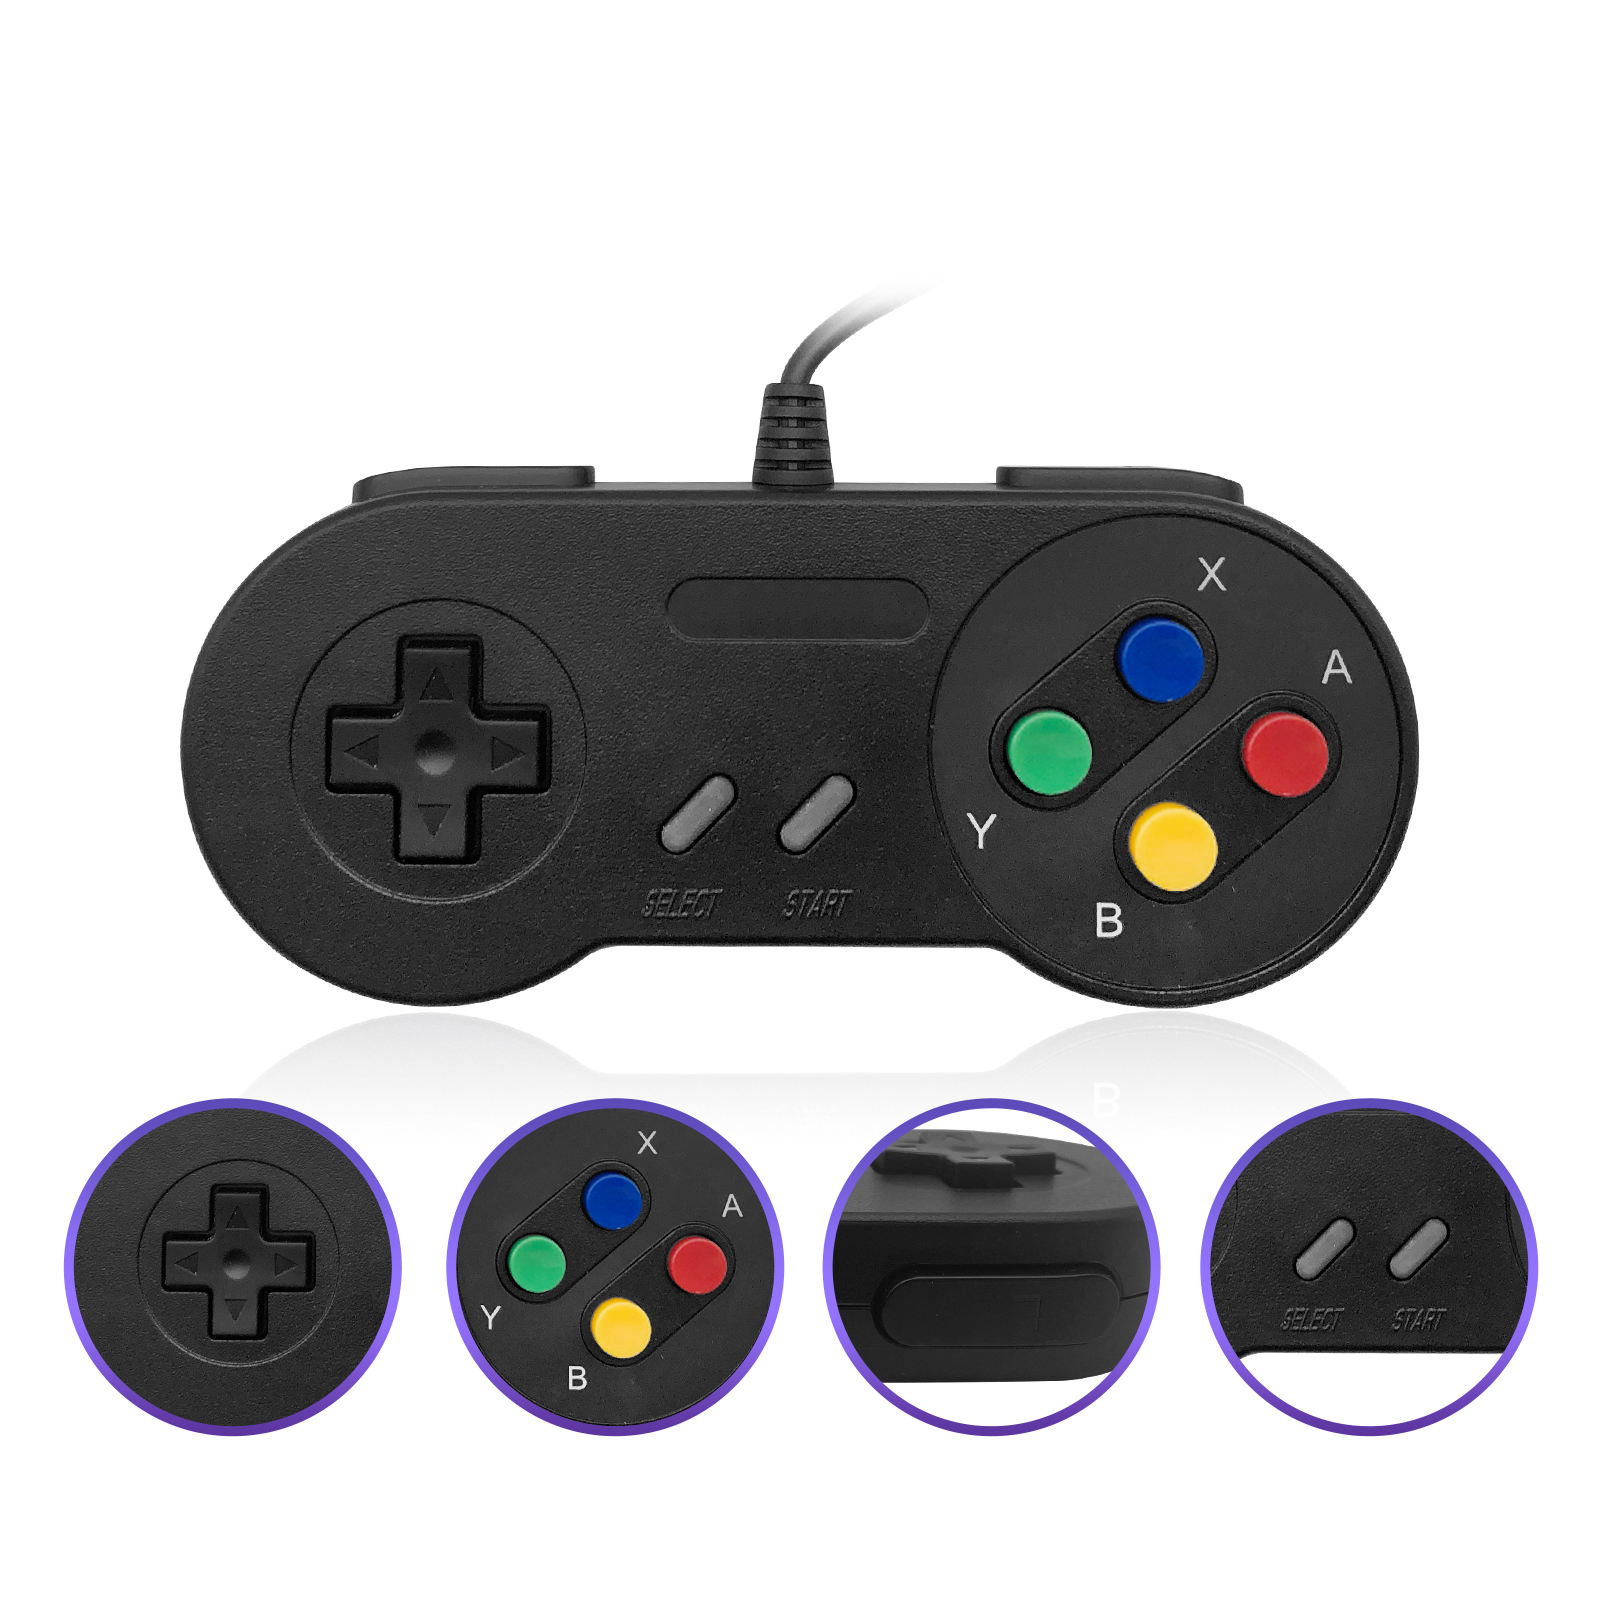 Usb Snes Controller Wired Controller for Switch, USB controller for PC Emulator Game, Mobile Controller for NES wired Joypad Game for Windows(Black)